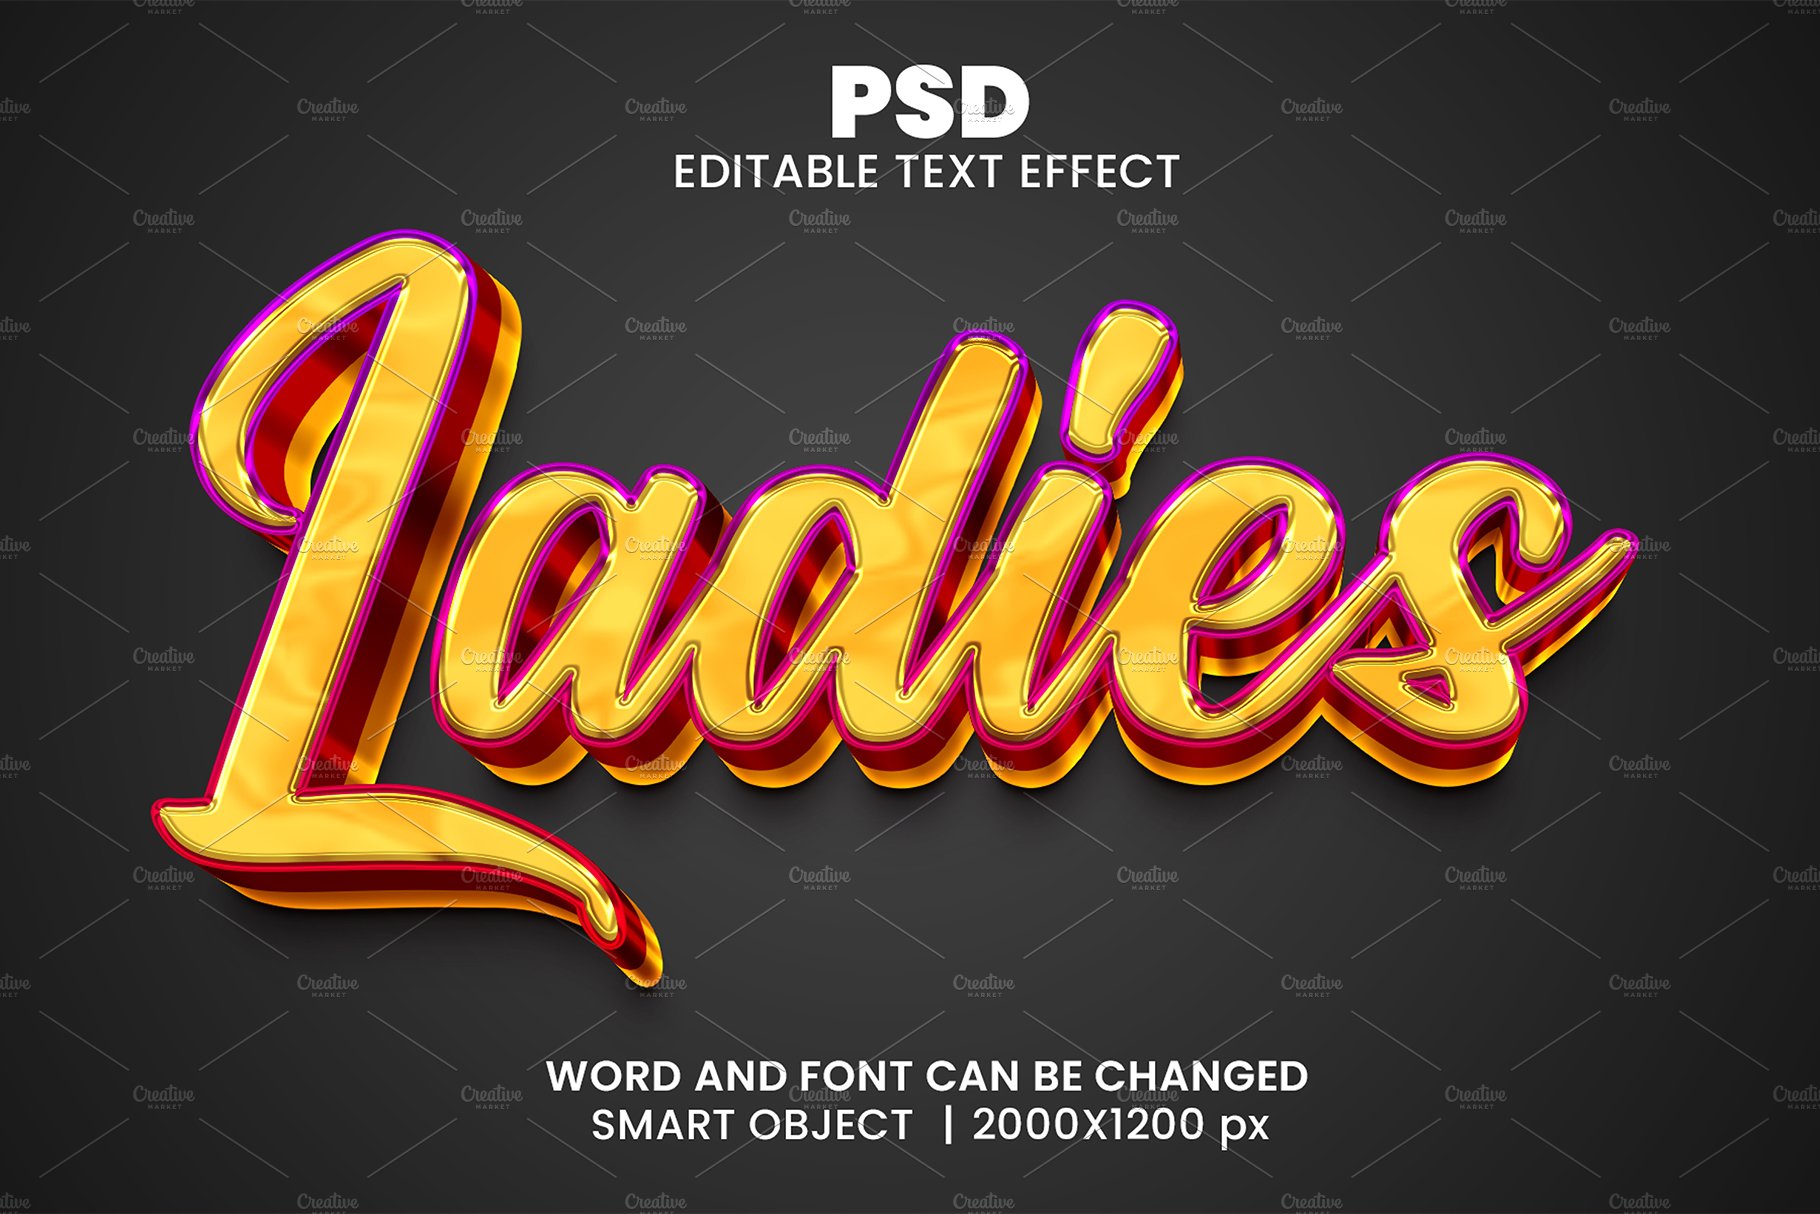 Ladies 3d Editable Psd Text Effectcover image.